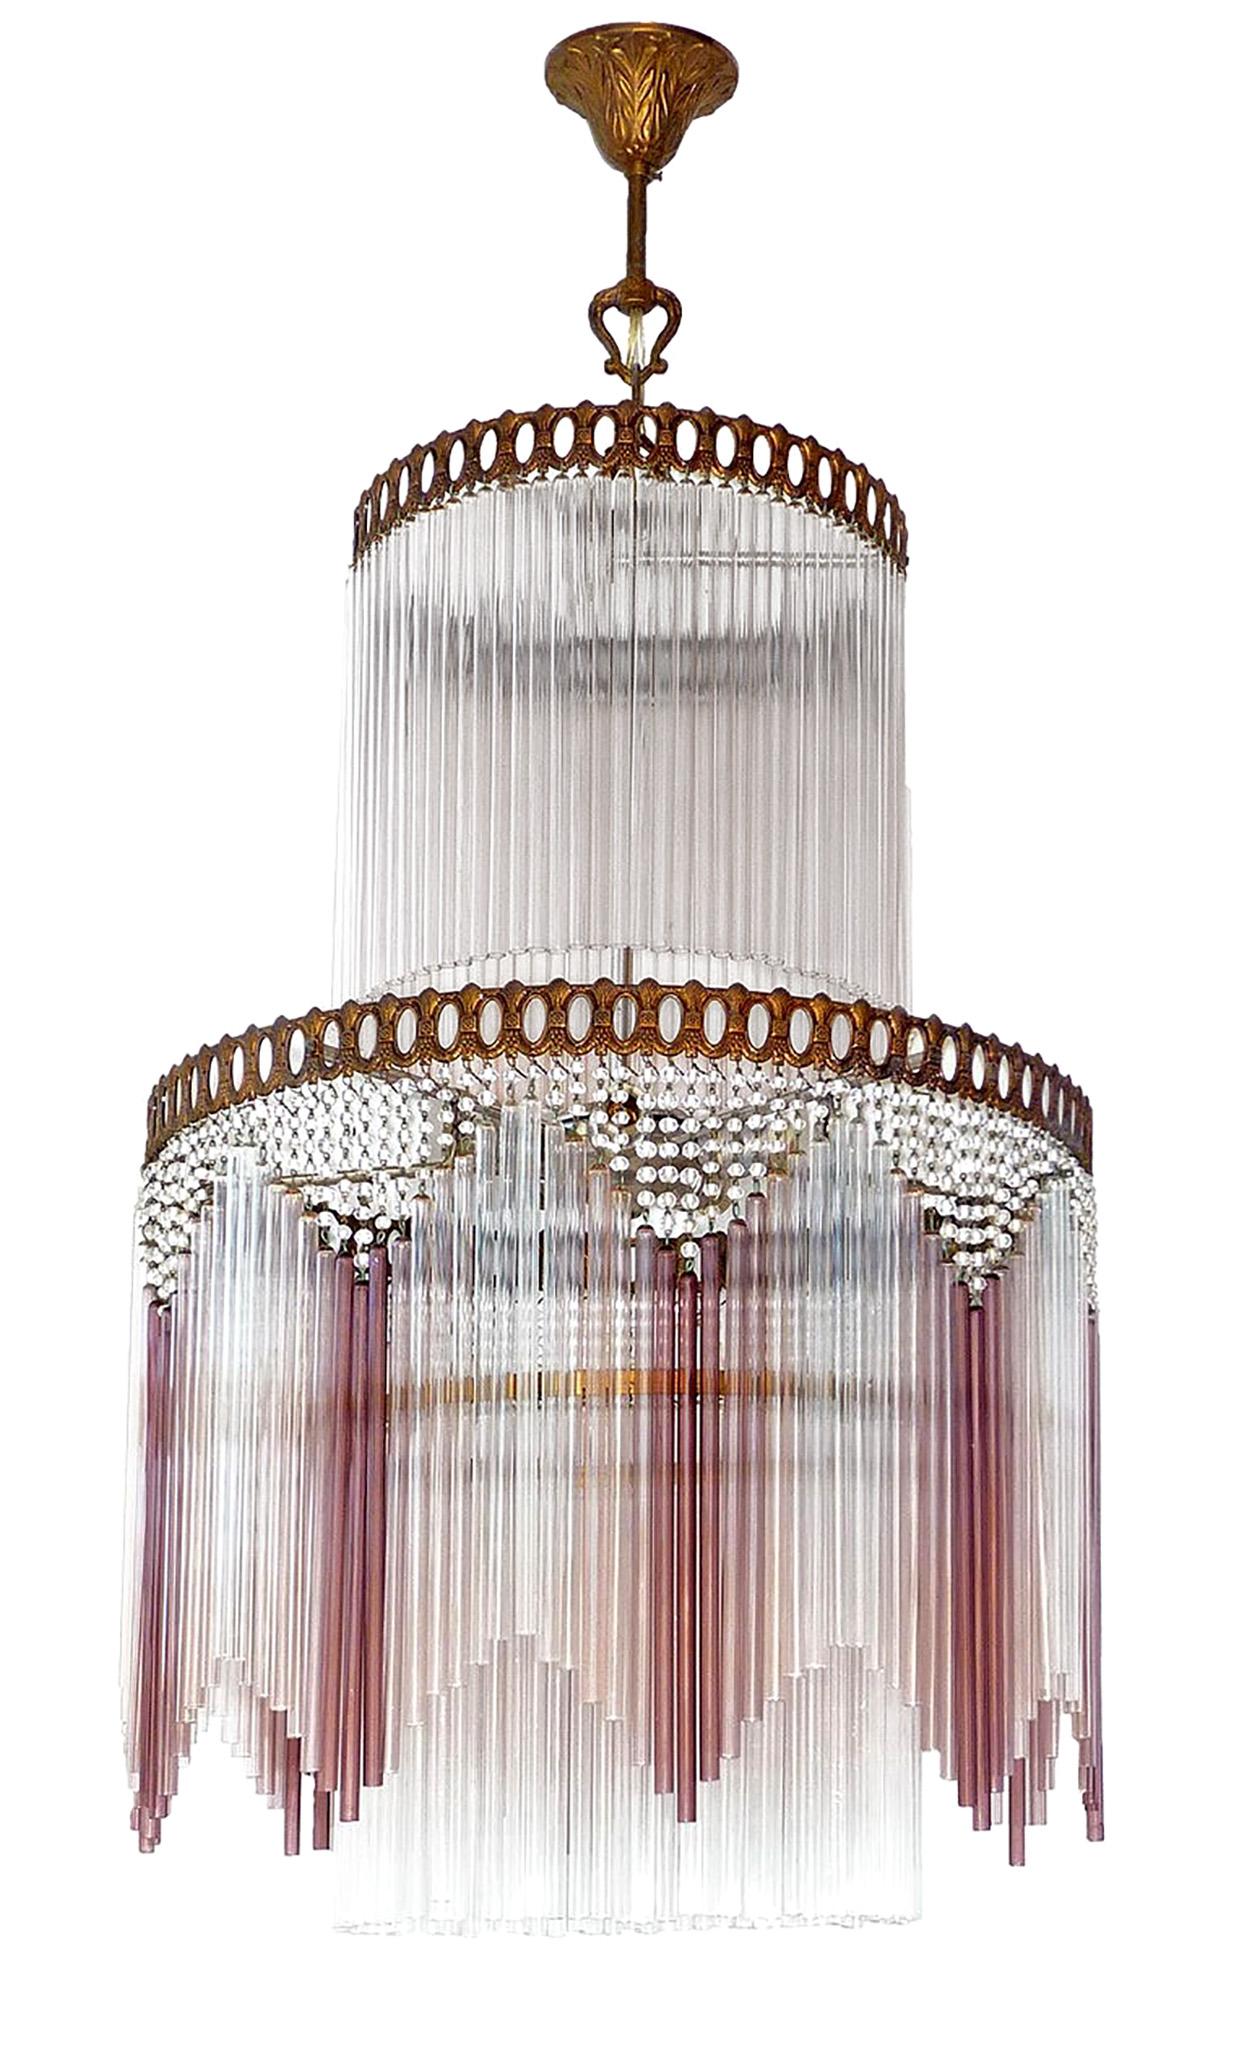 Fabulous French Art Deco and Art Nouveau gilt chandelier with glass beads and pink glass straws.
Measures:
Diameter 16 in/ 40 cm
Height 36 in/ 90 cm
Weight 12 lb/ 5 Kg
5 light bulbs E14/ good working condition
Assembly required. Bulbs not included.